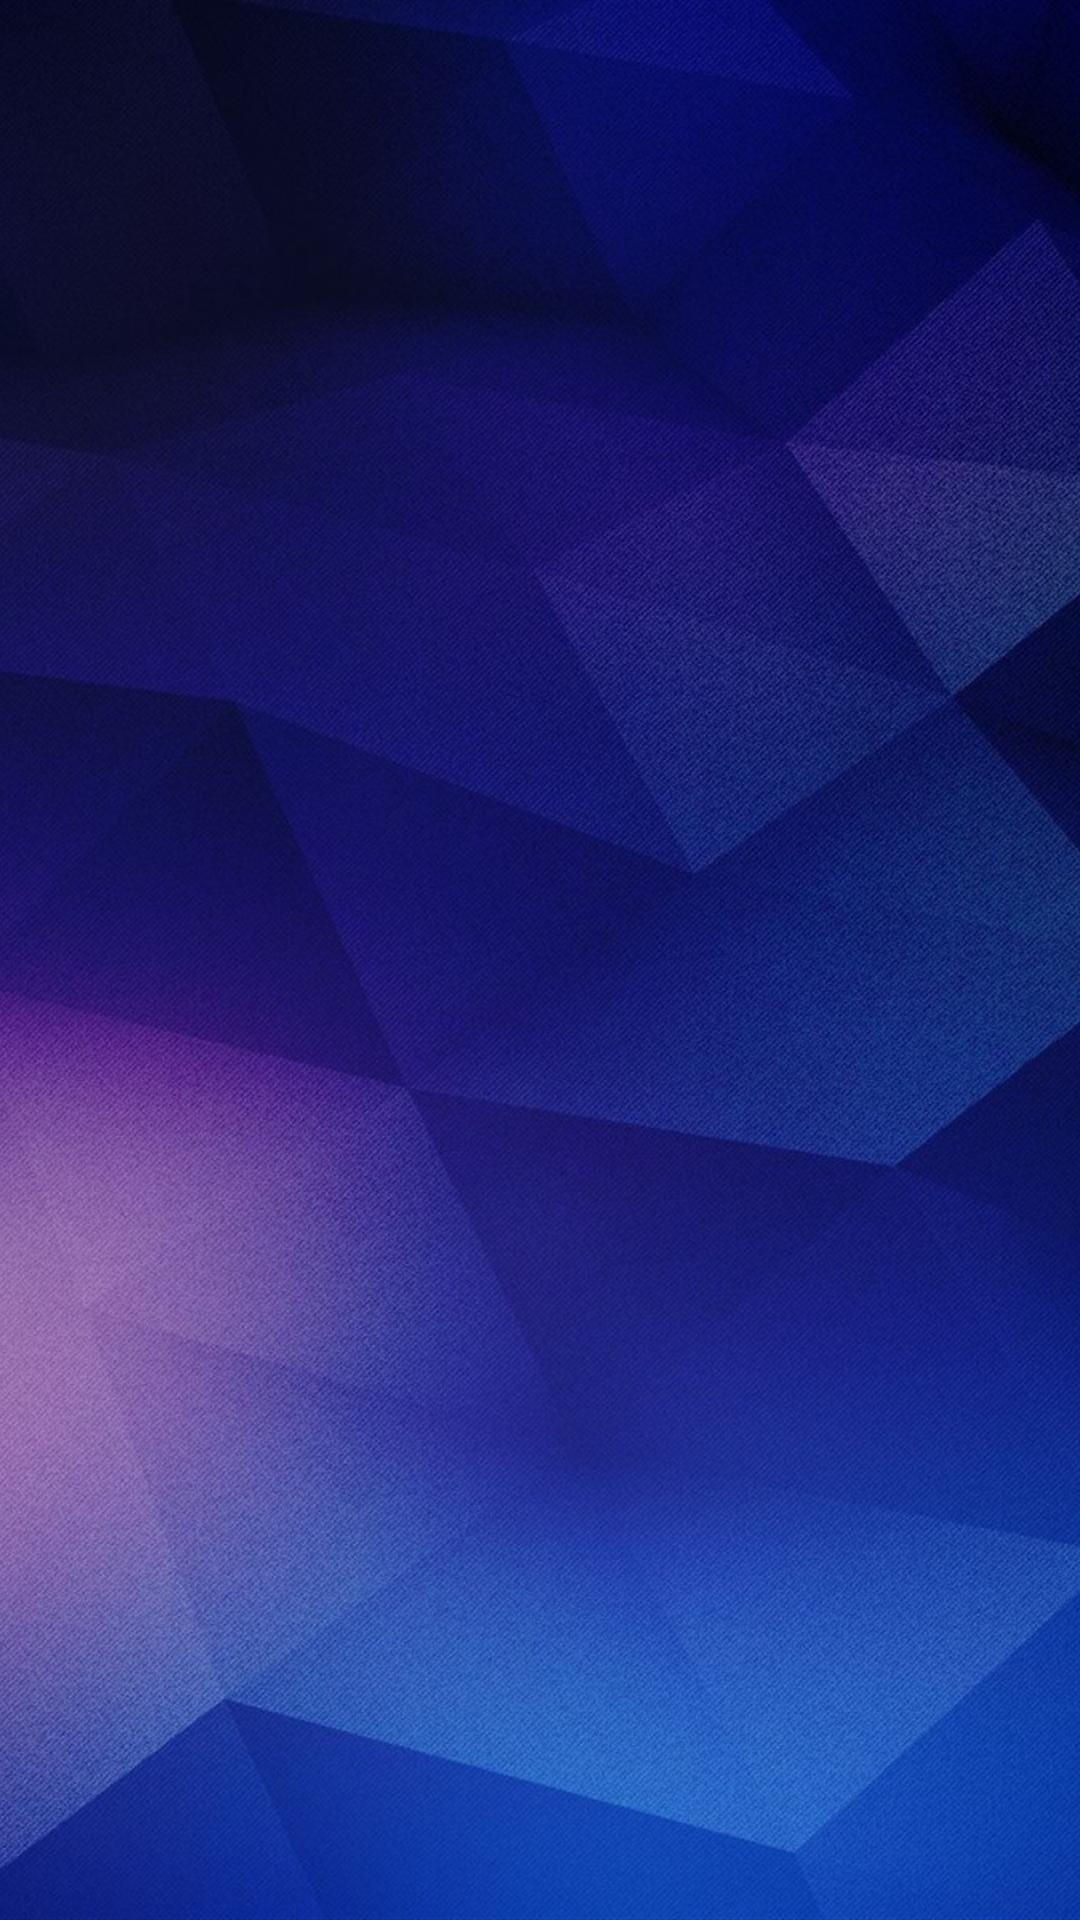 Plus HD Texture Triangles Abstraction iPhone Wallpaper